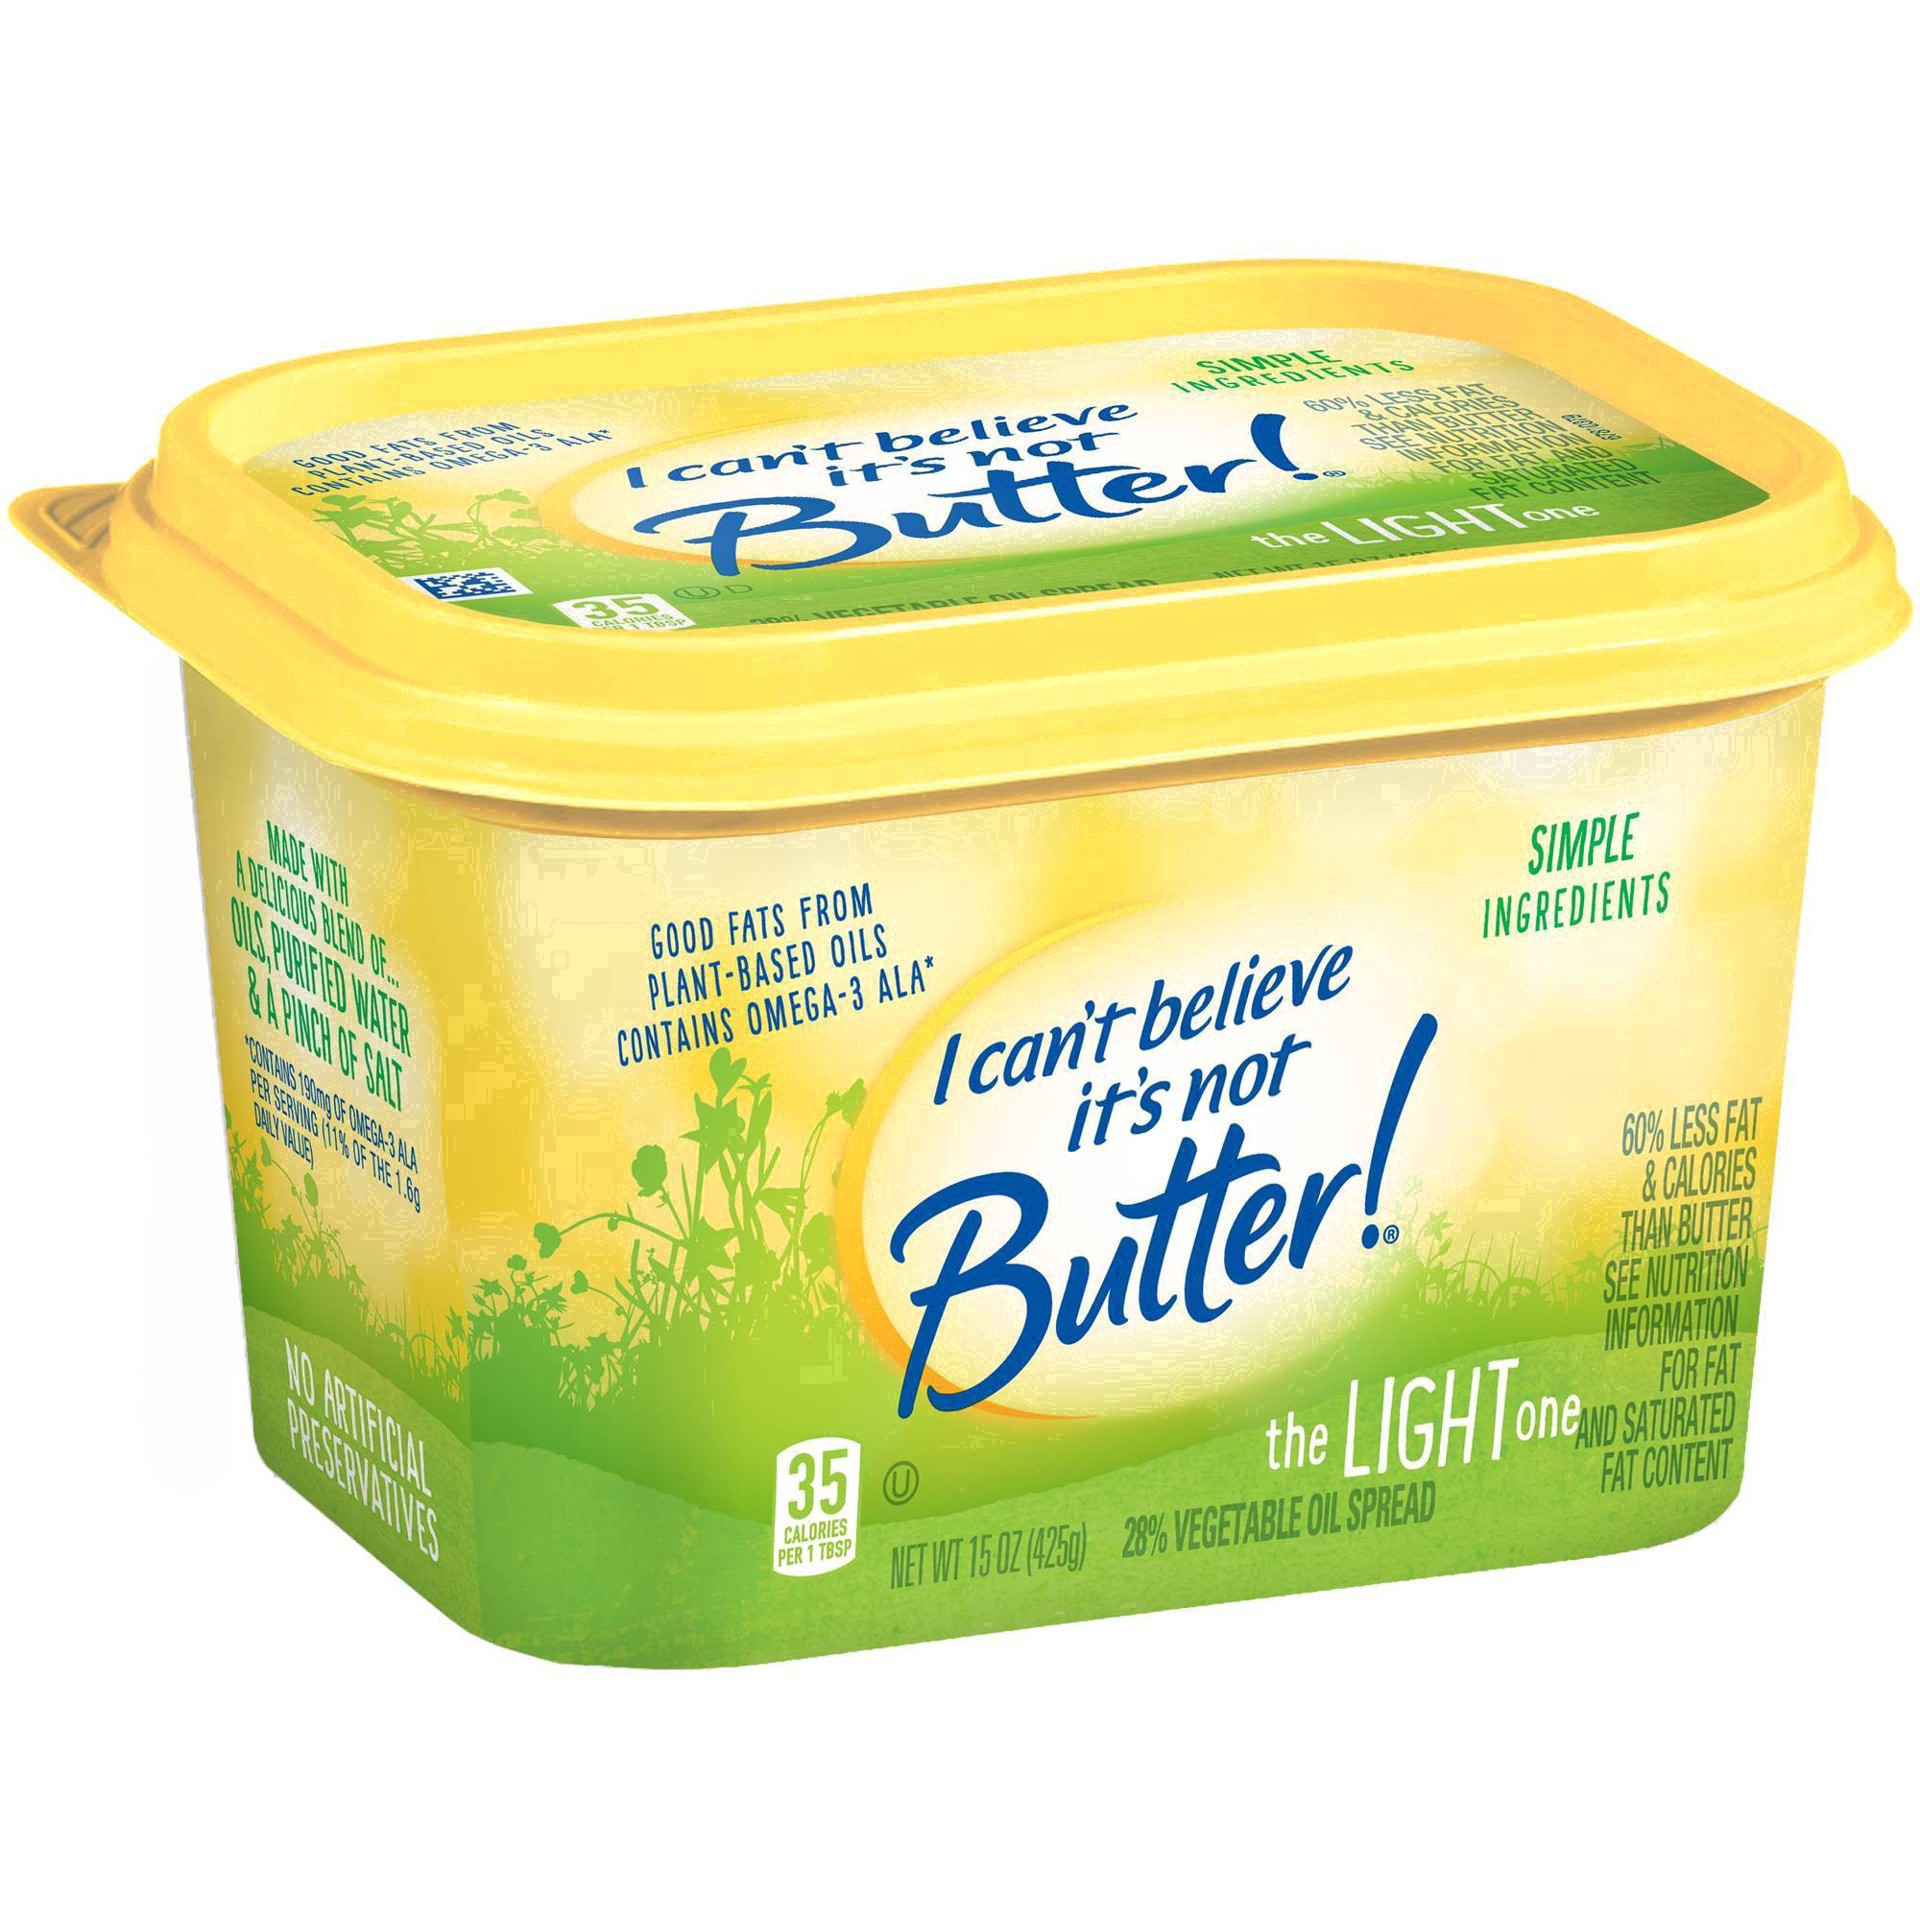 slide 6 of 67, I Can't Believe It's Not Butter! I Can’t Believe It’s Not Butter!® light spread, 15 oz